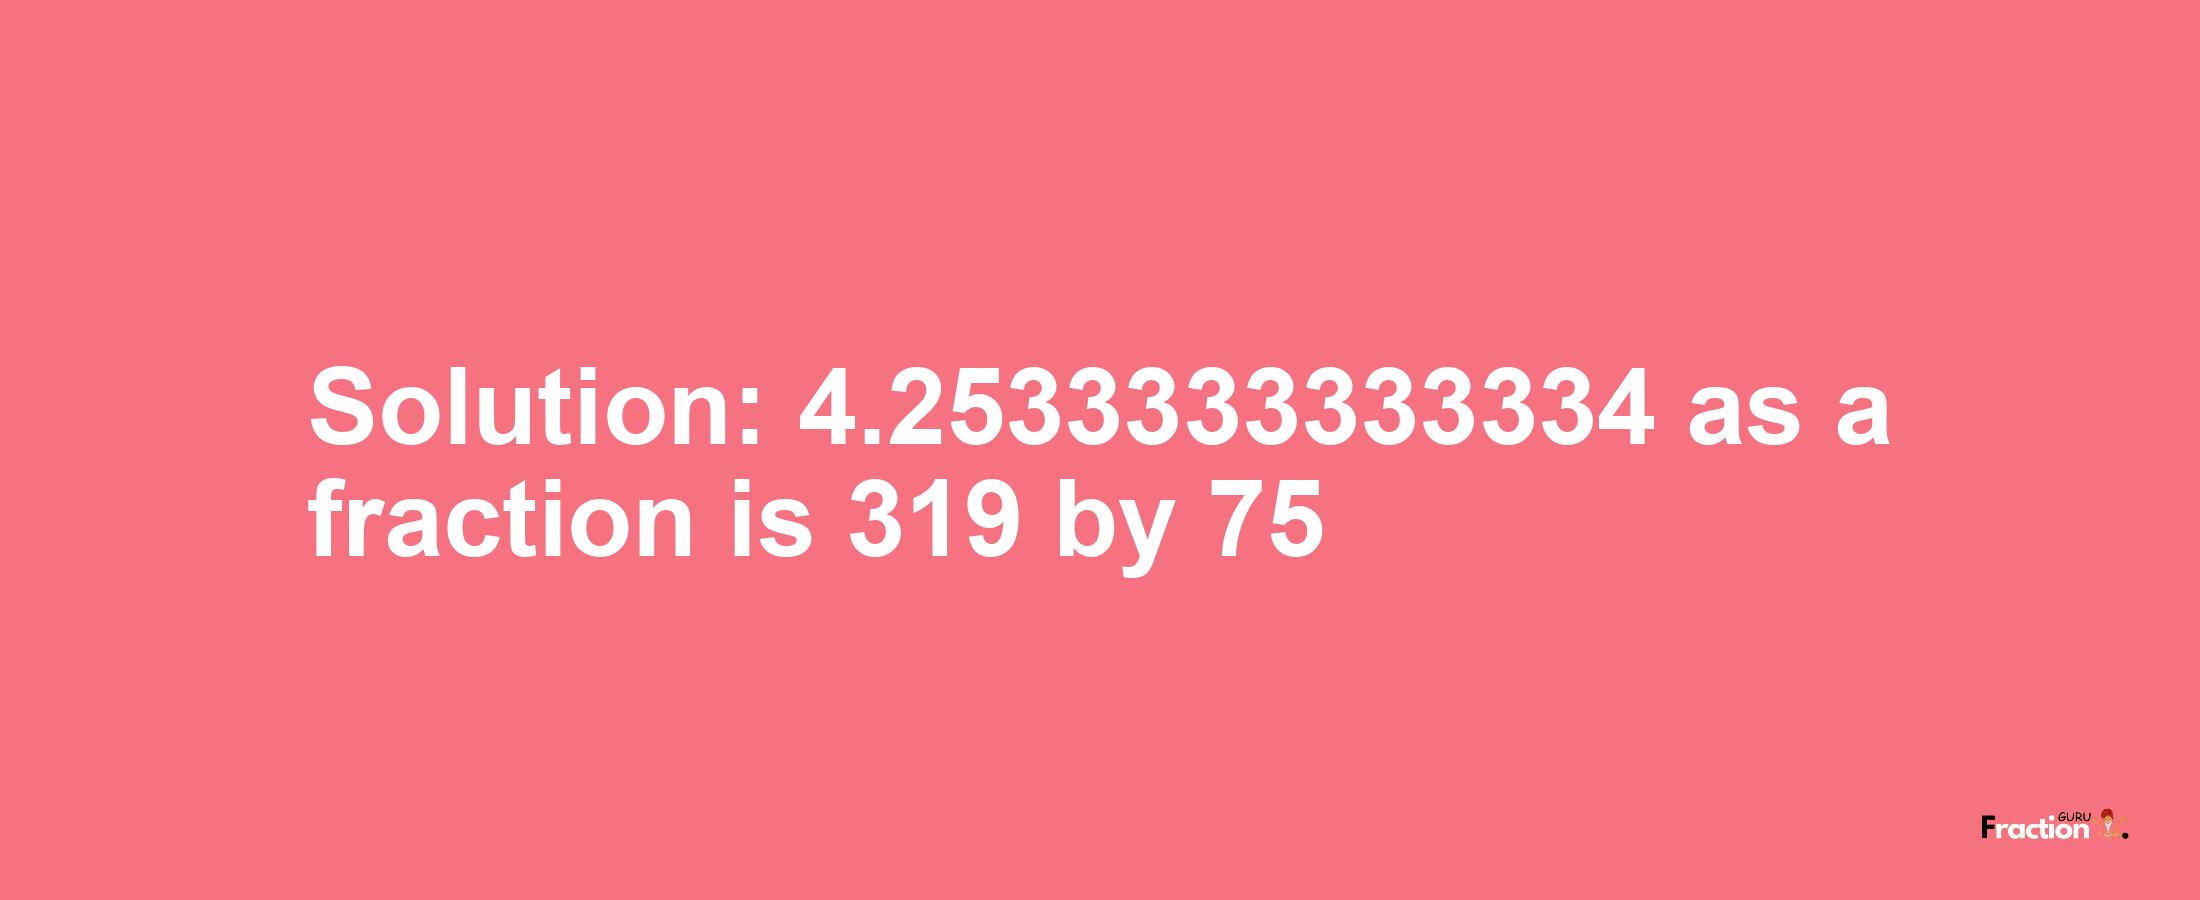 Solution:4.2533333333334 as a fraction is 319/75